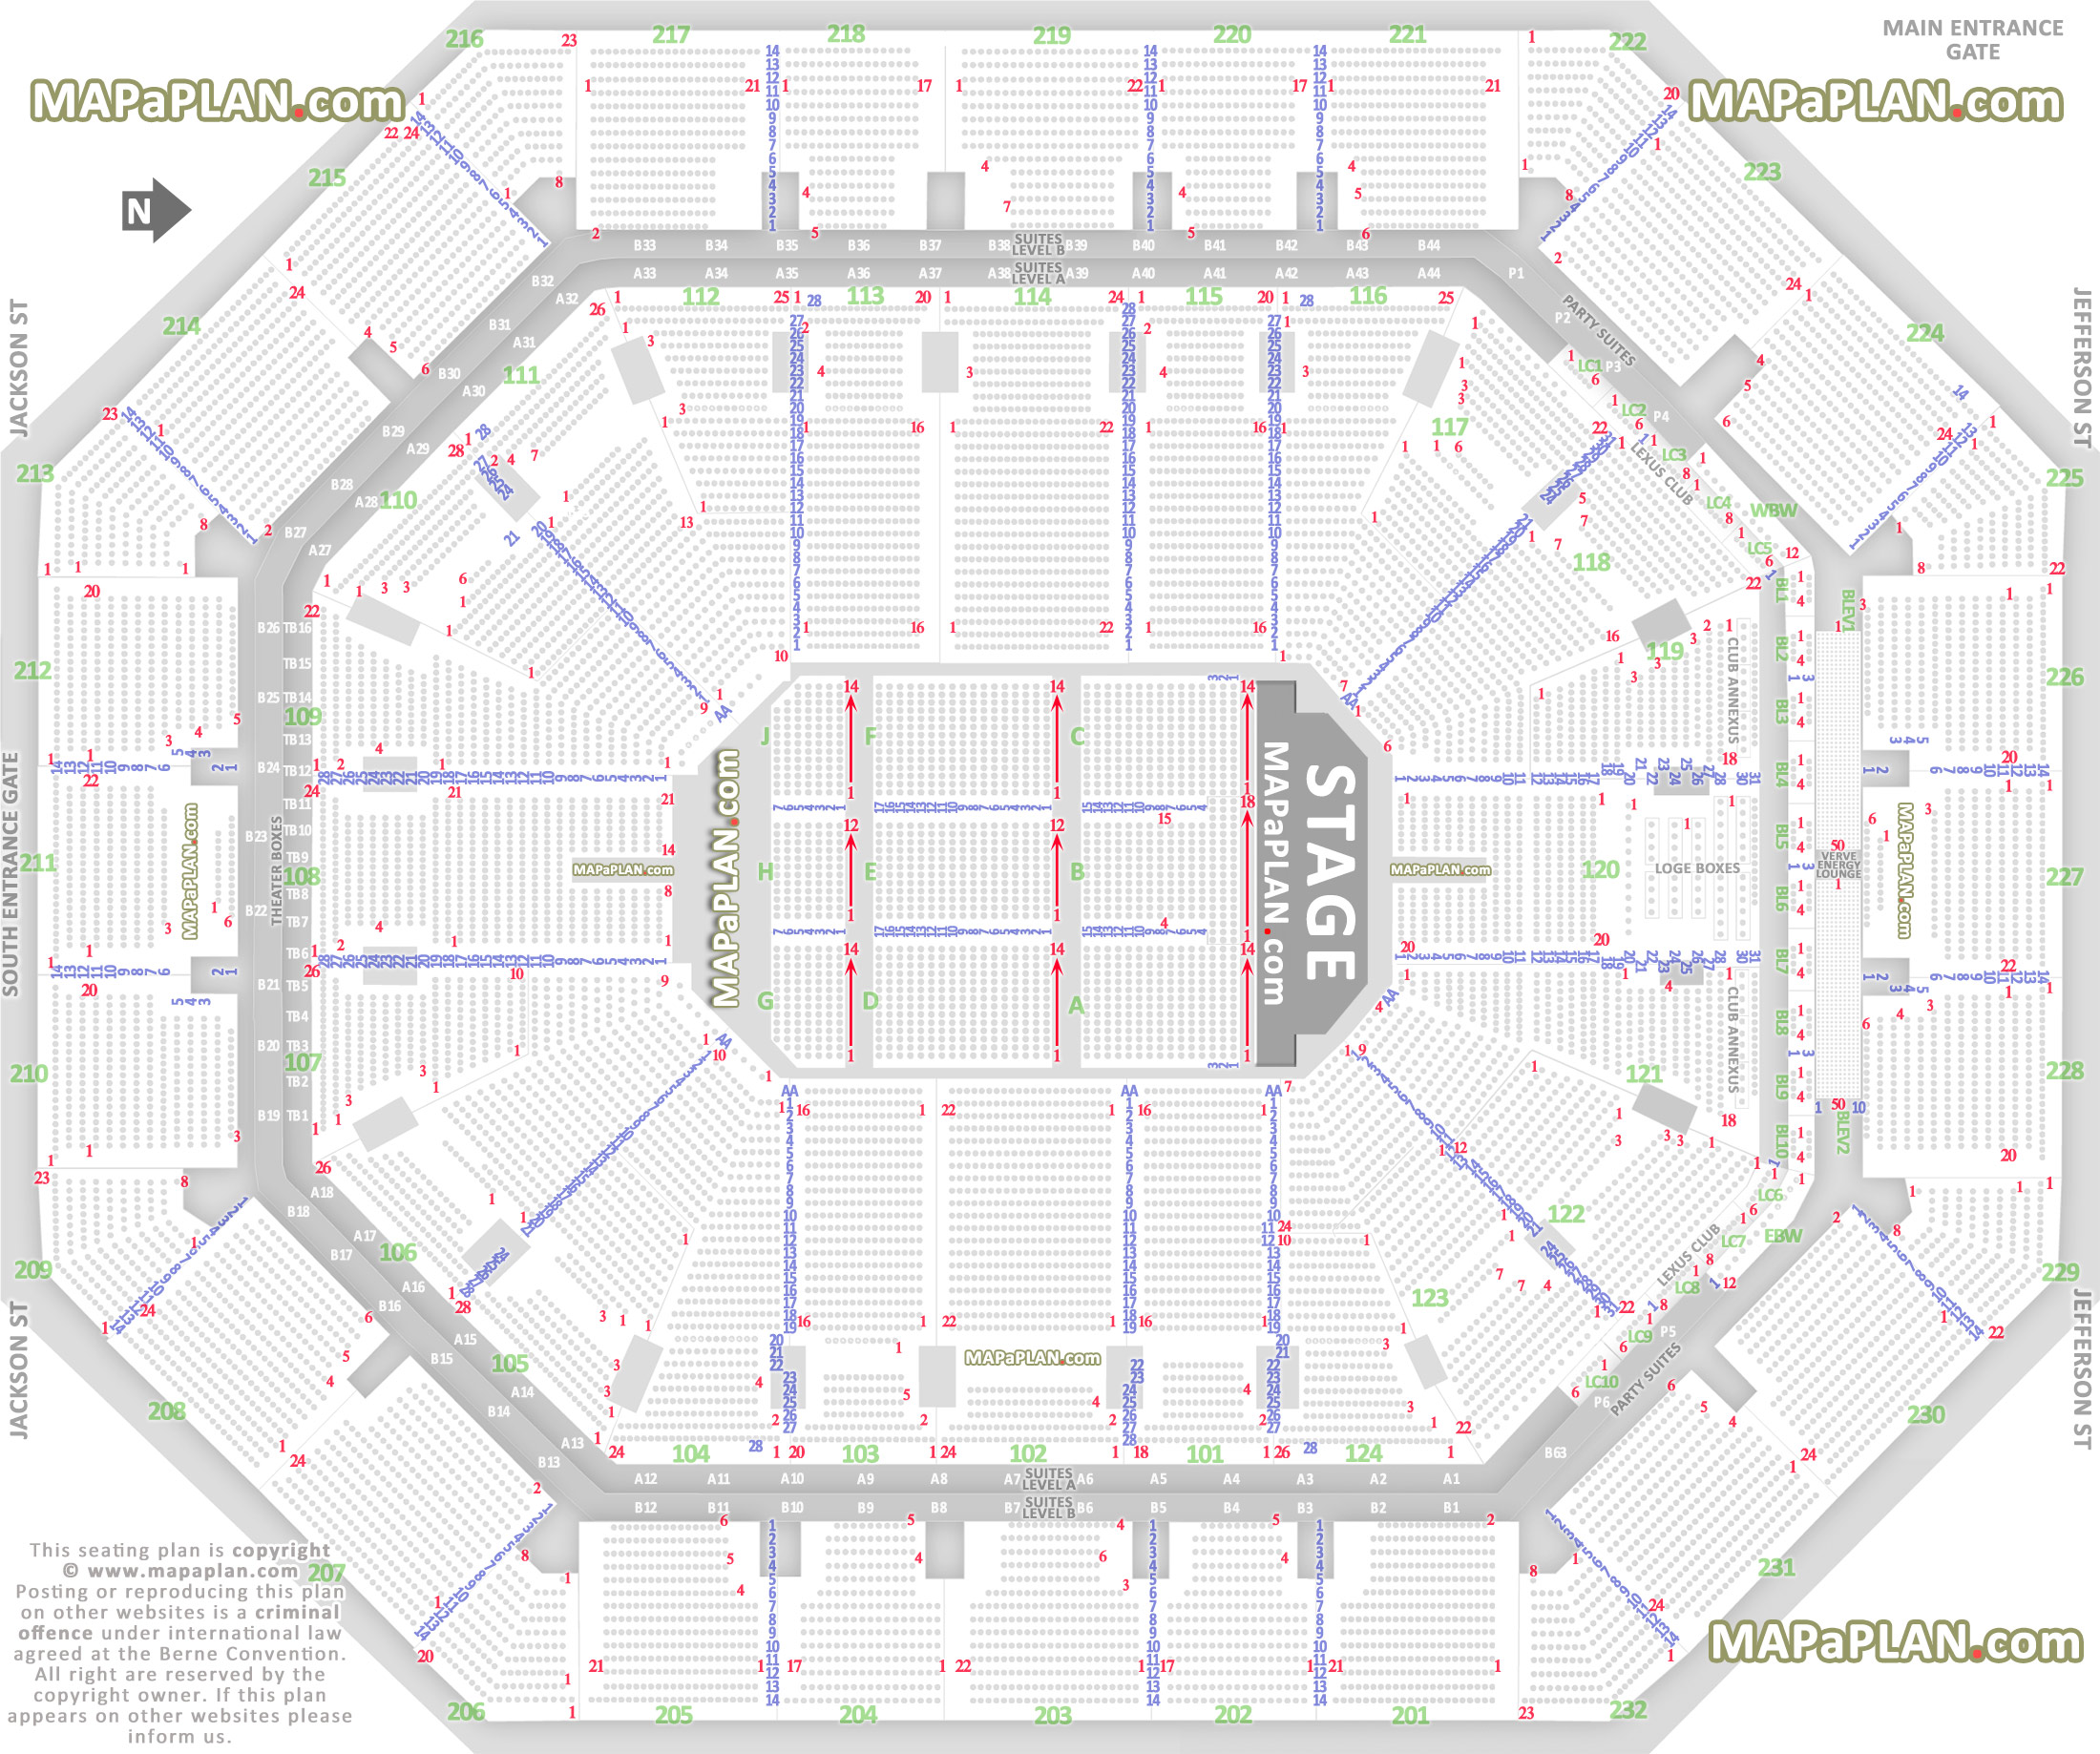 detailed seat row numbers end stage concert sections floor plan map lower upper club level layout Phoenix Talking Stick Resort Arena seating chart